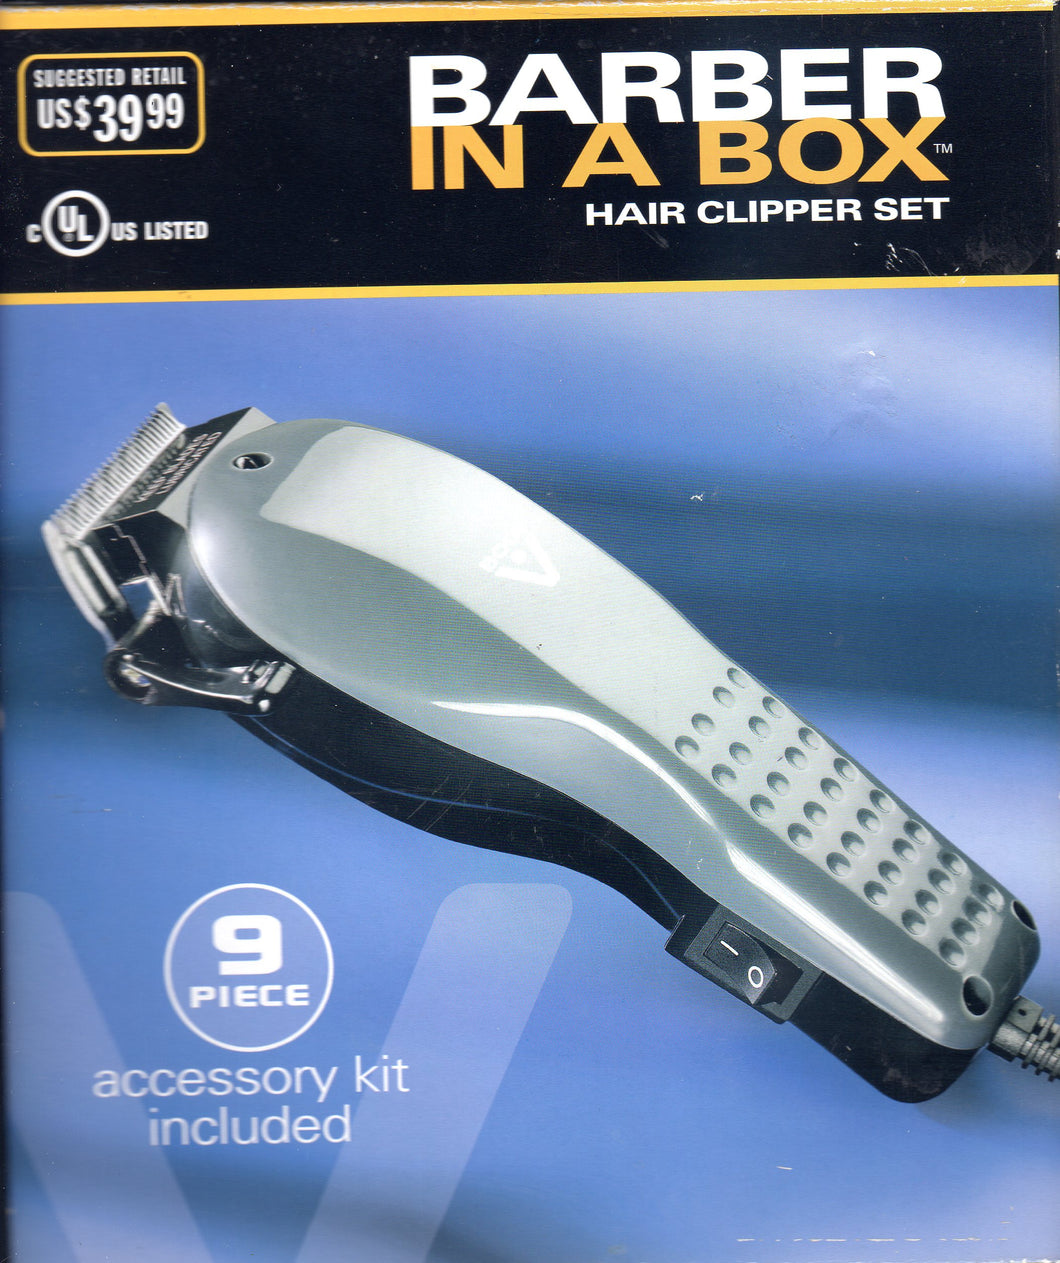 Barber in a Box Hair Clipper Set - Like New. Includes all pieces.